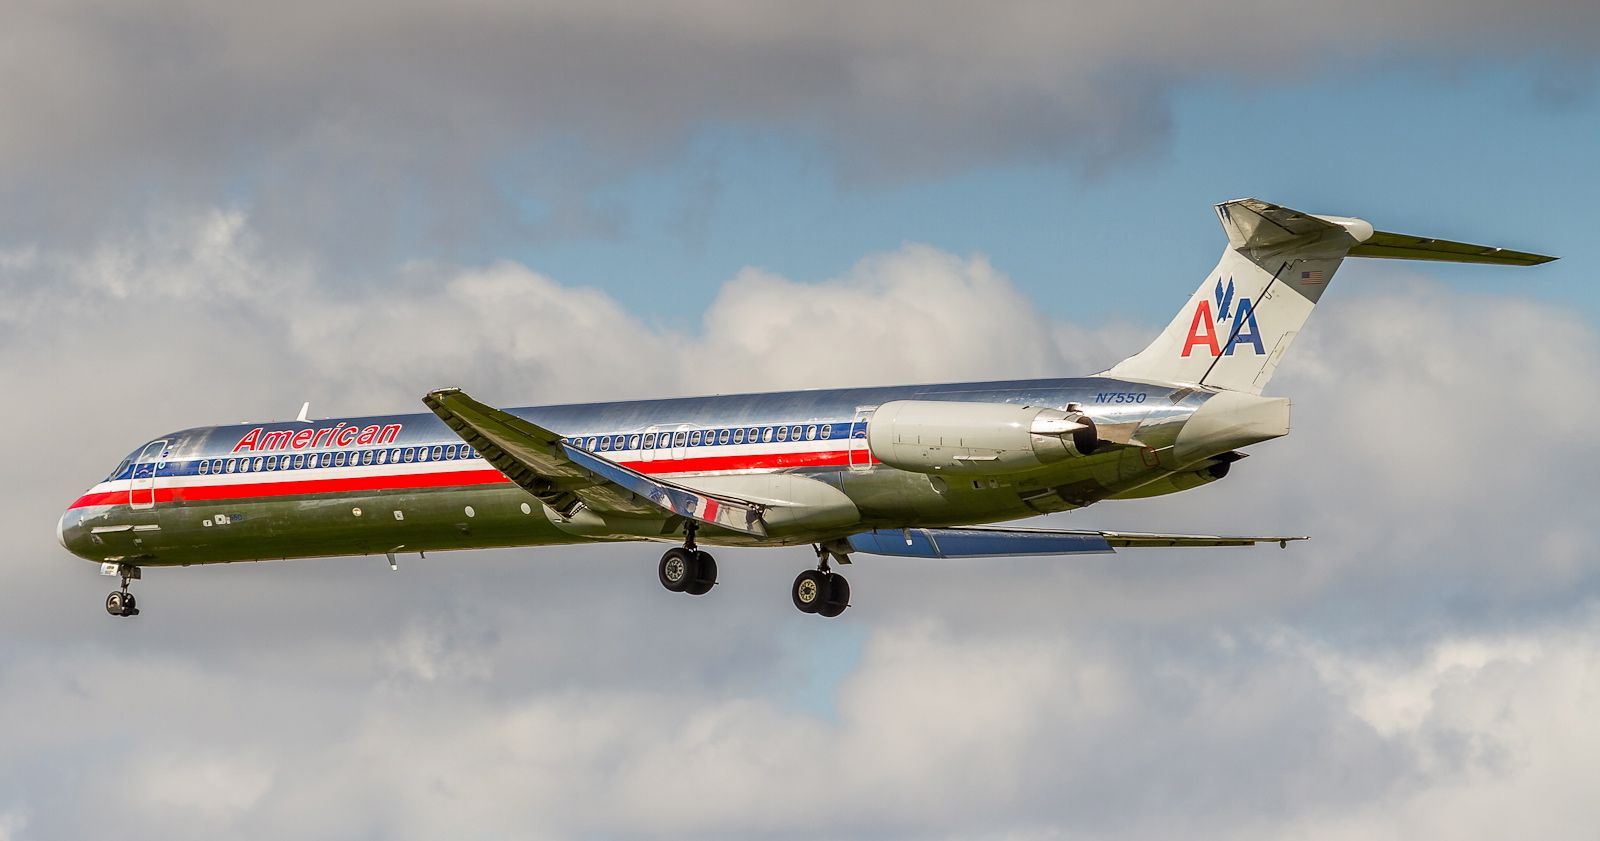 McDonnell Douglas MD-82 (N7550) - AAL92 arrives from Dallas/Fort Worth. Catch these beauties while you can!!